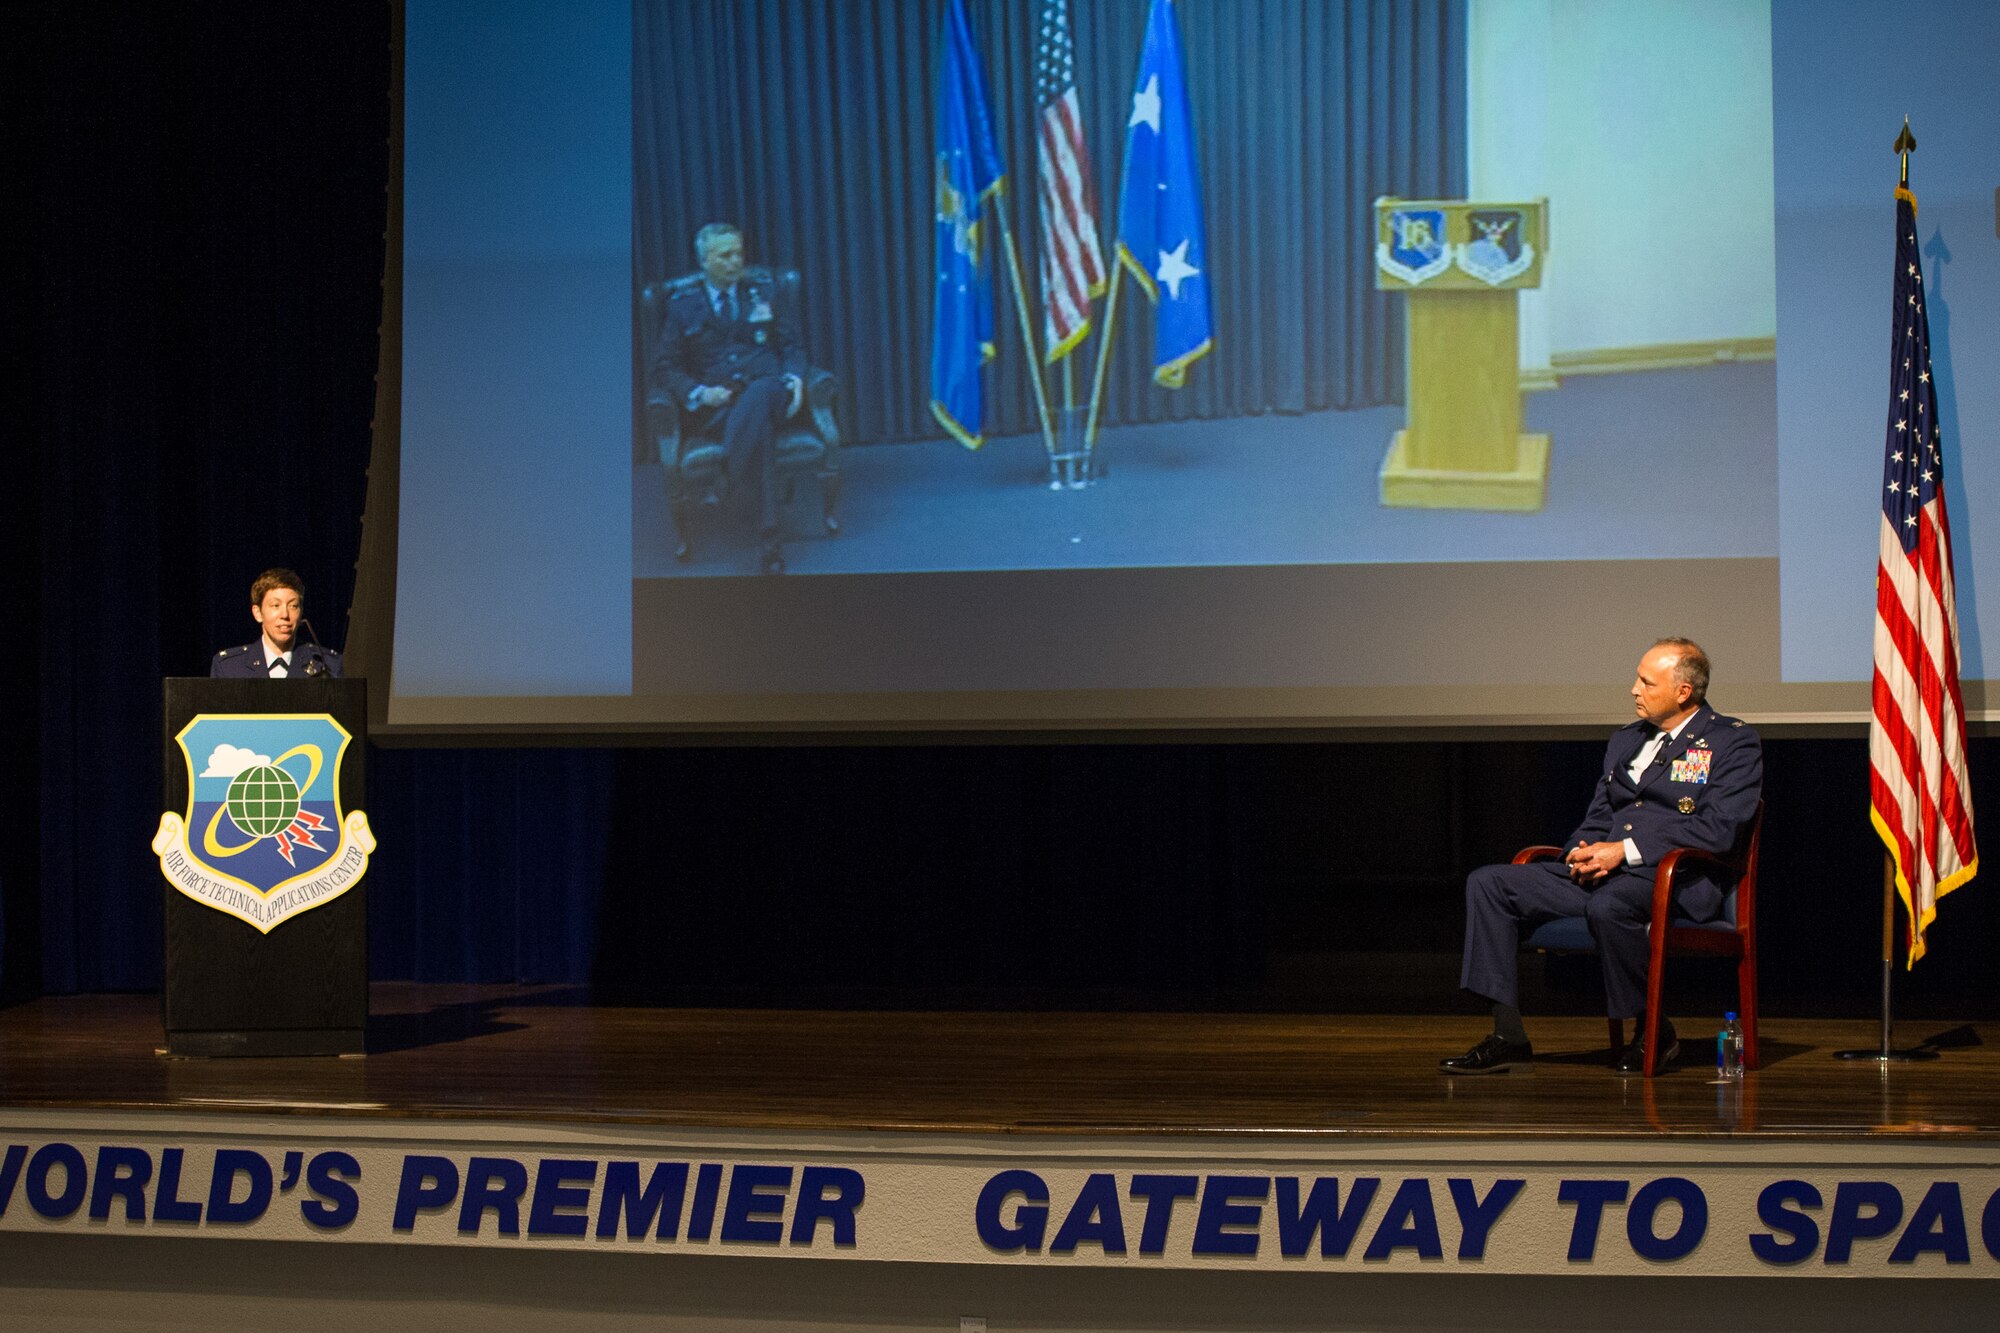 Col. Katharine Barber (left) delivers her first remarks to the men and women of the Air Force Technical Applications Center, Patrick AFB, Fla., after taking command of the center from outgoing commander Col. Chad Hartman (right) June 30, 2020.  Seen on screen is presiding officer Lt. Gen. Timothy Haugh, commander of 16th Air Force, who streamed via video teleconference from Lackland AFB, Texas. (U.S. Air Force photo by Amanda Ryrholm)